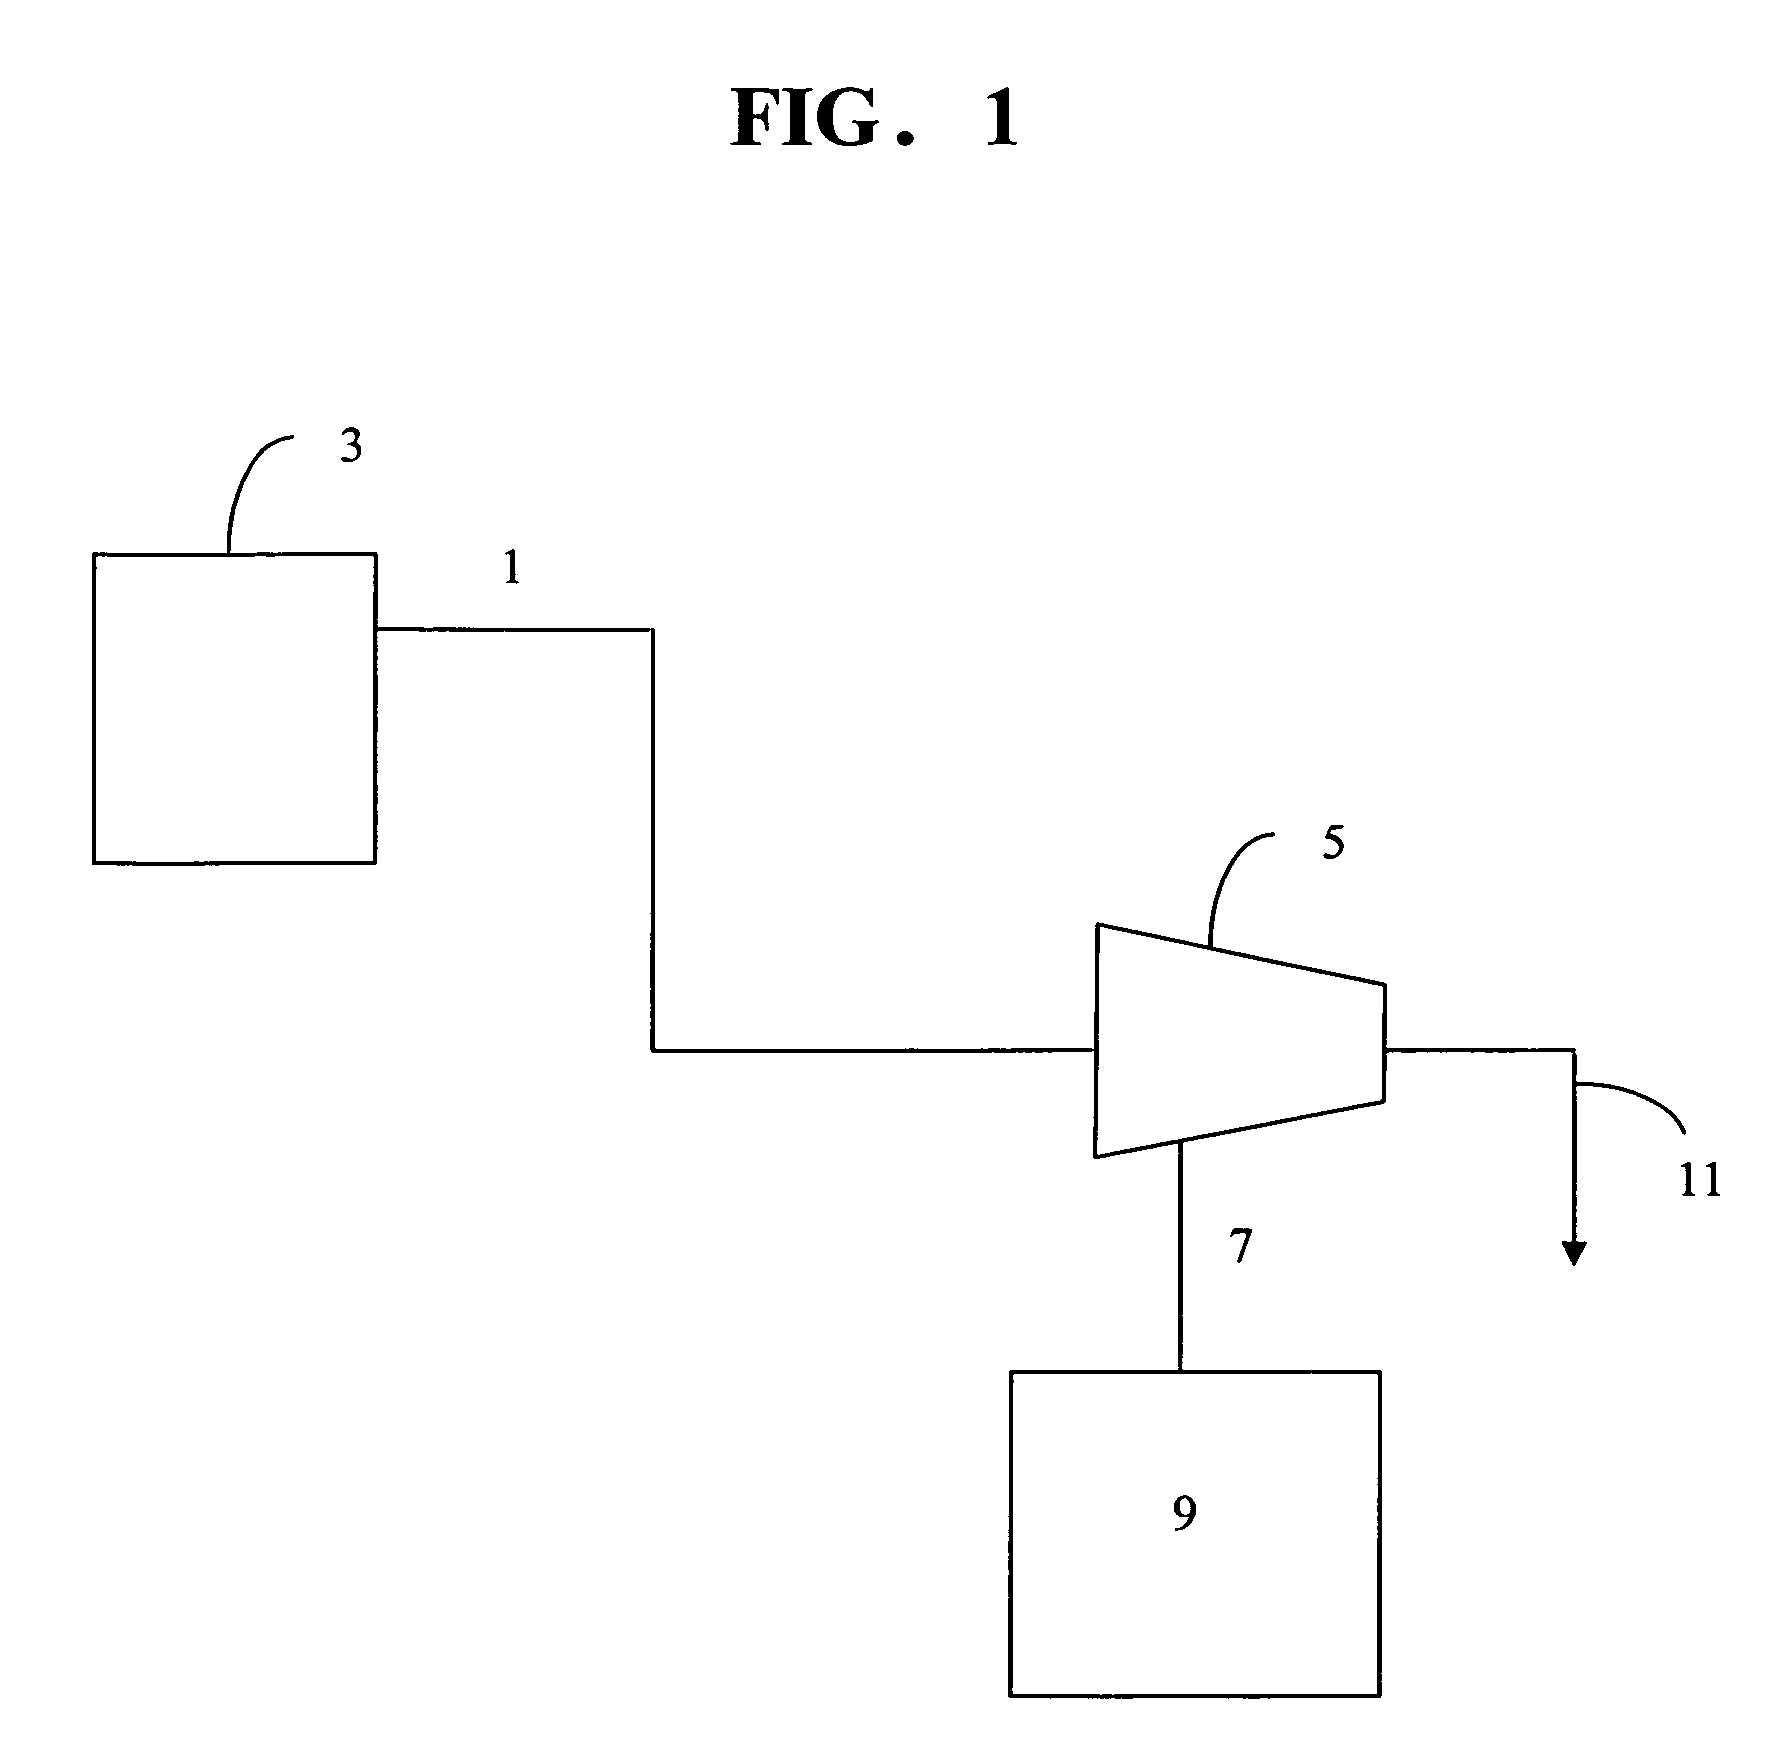 Processes for producing polymer blends and polymer blend pellets